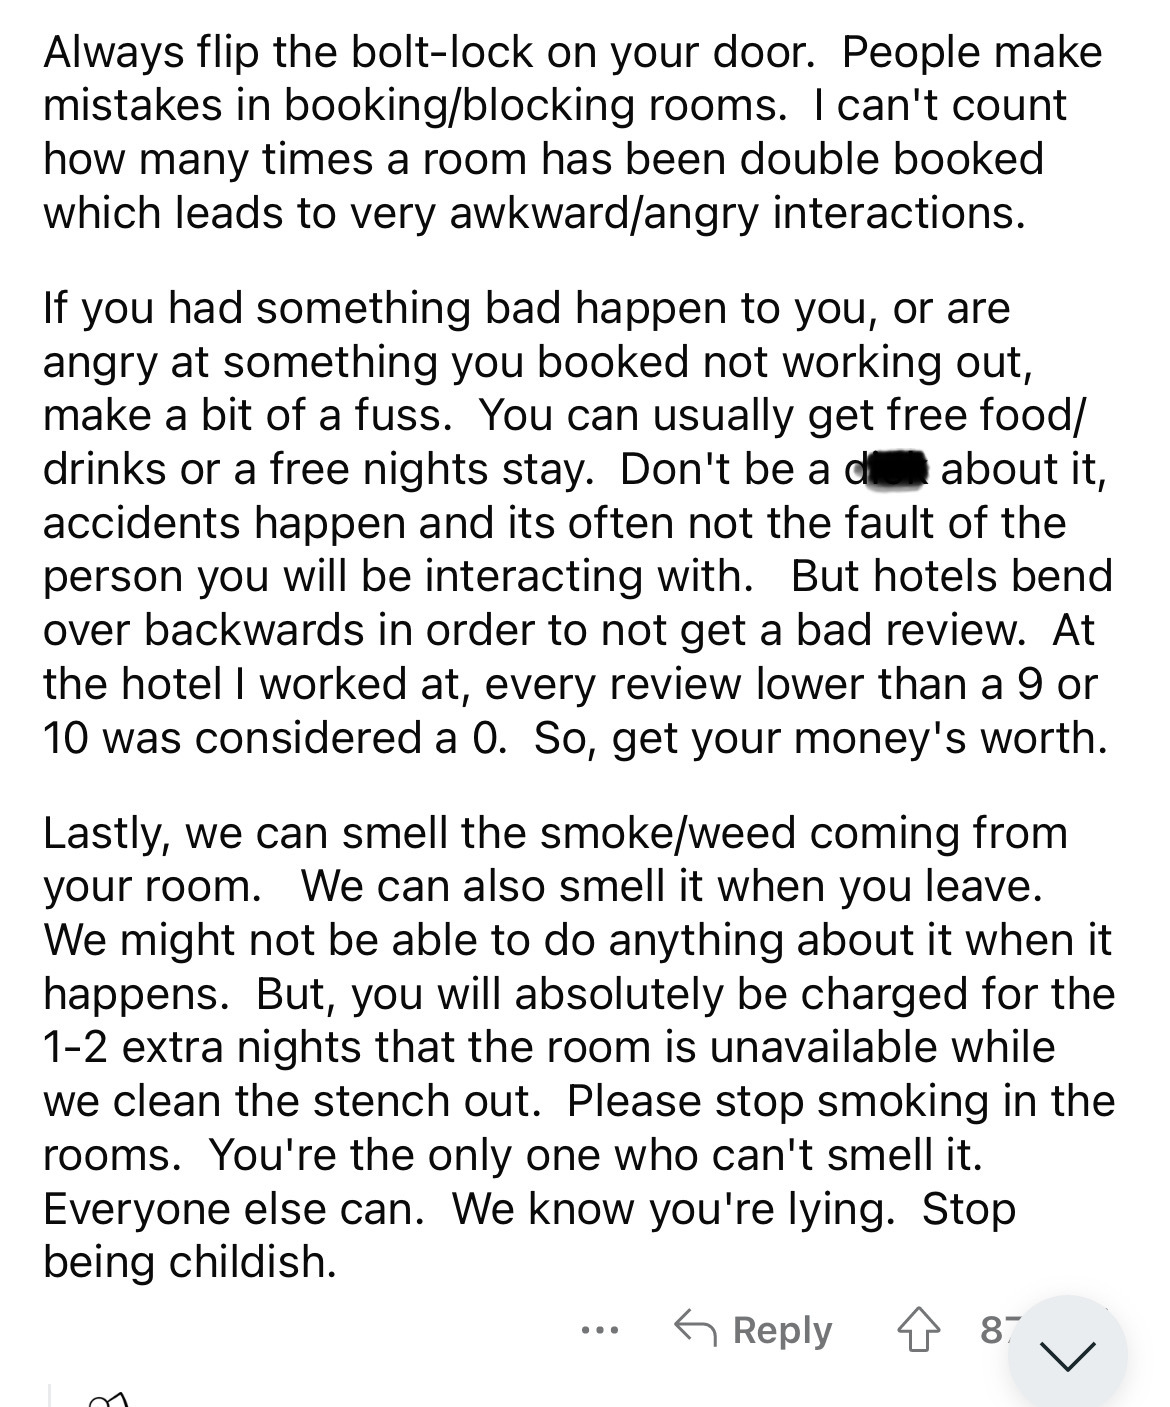 document - Always flip the boltlock on your door. People make mistakes in bookingblocking rooms. I can't count how many times a room has been double booked which leads to very awkwardangry interactions. If you had something bad happen to you, or are angry